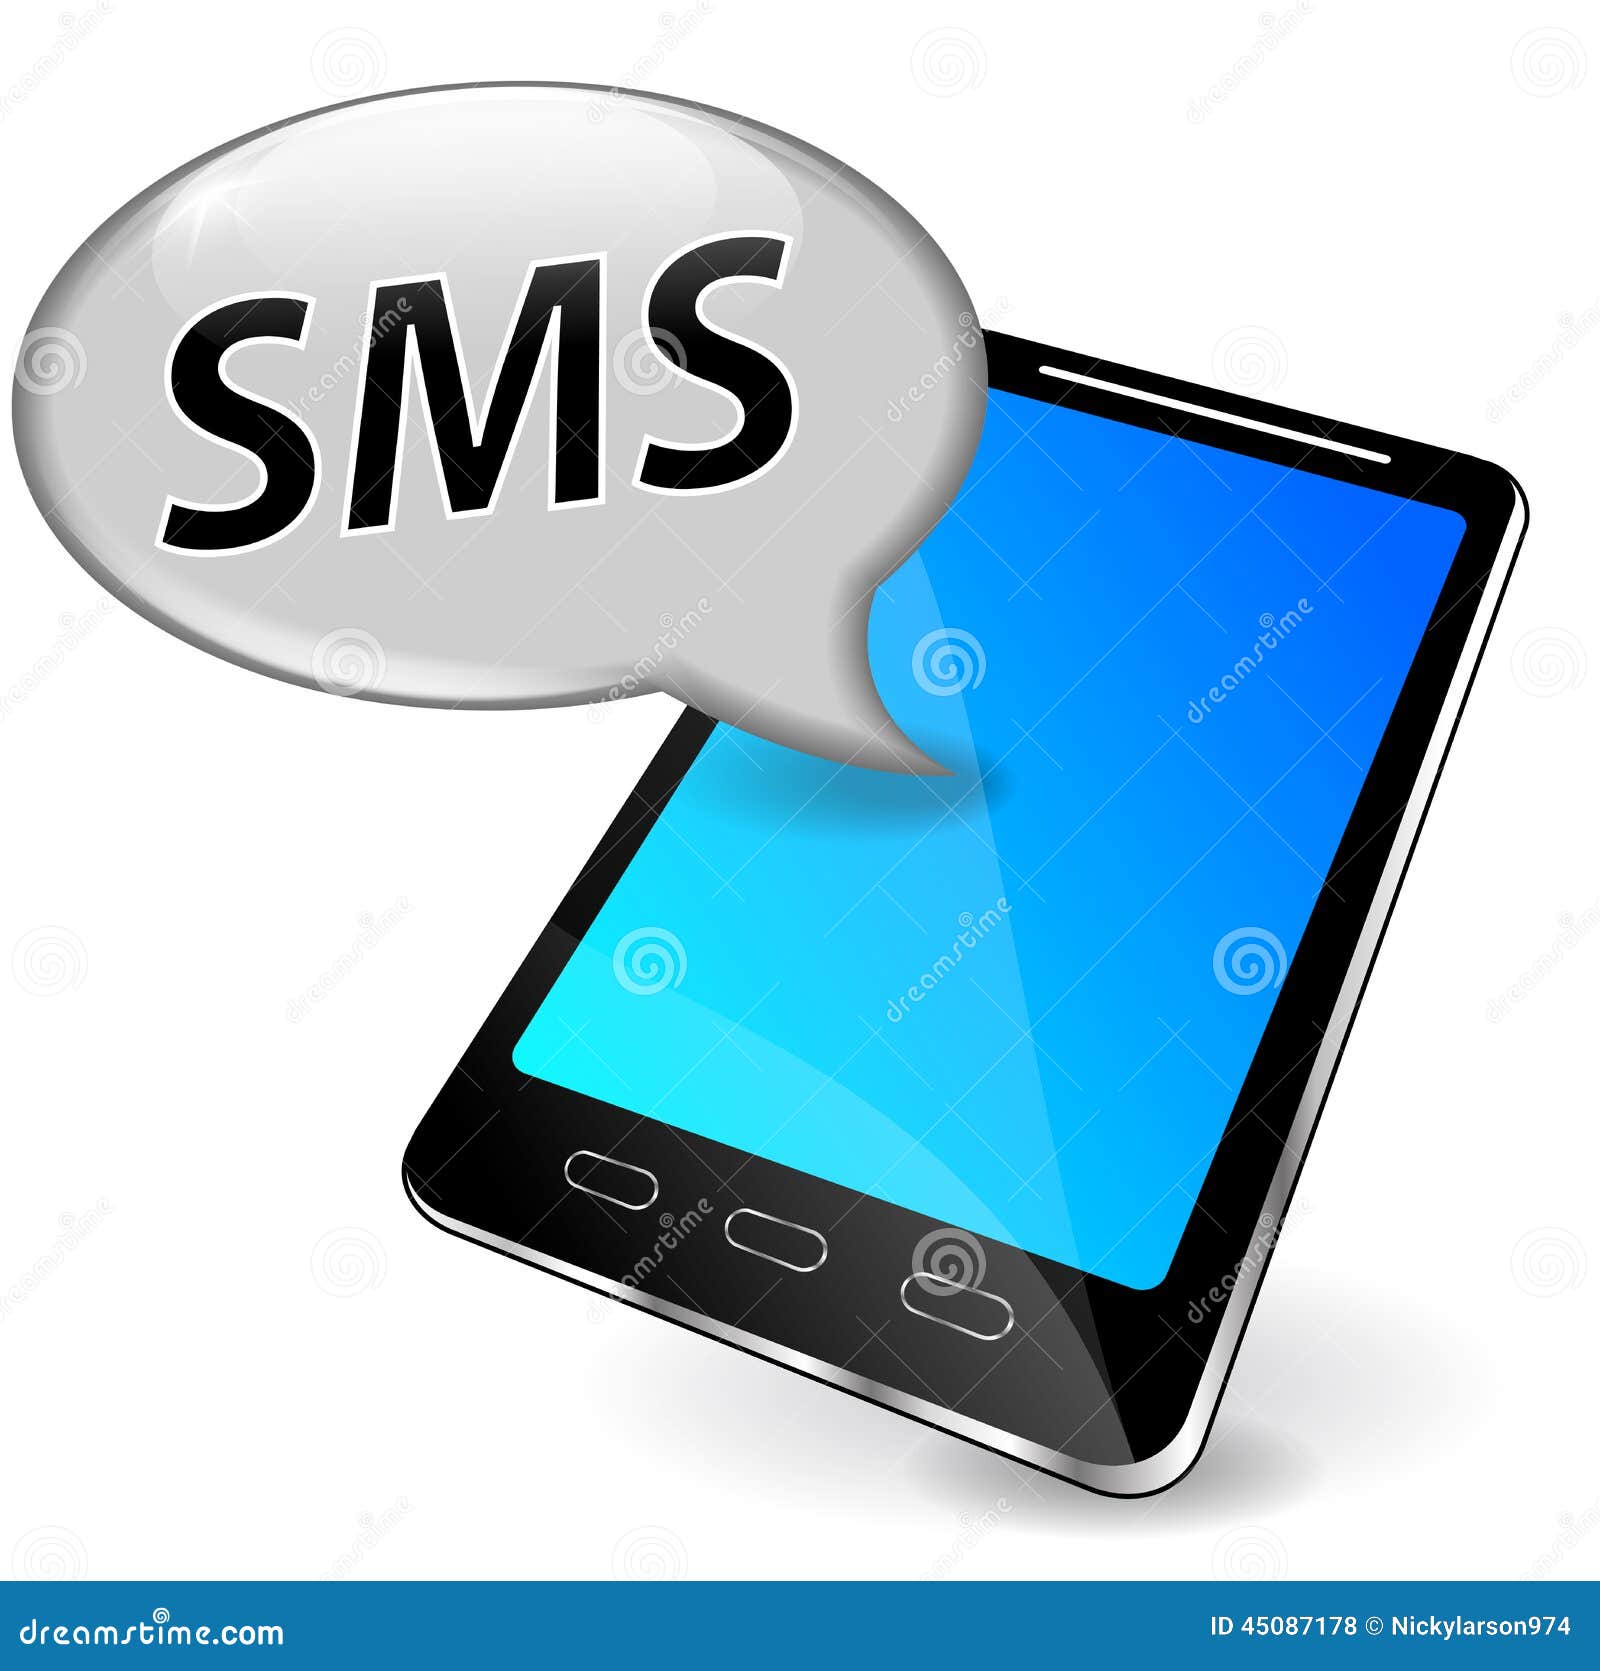 mobile phone sms clipart - photo #7